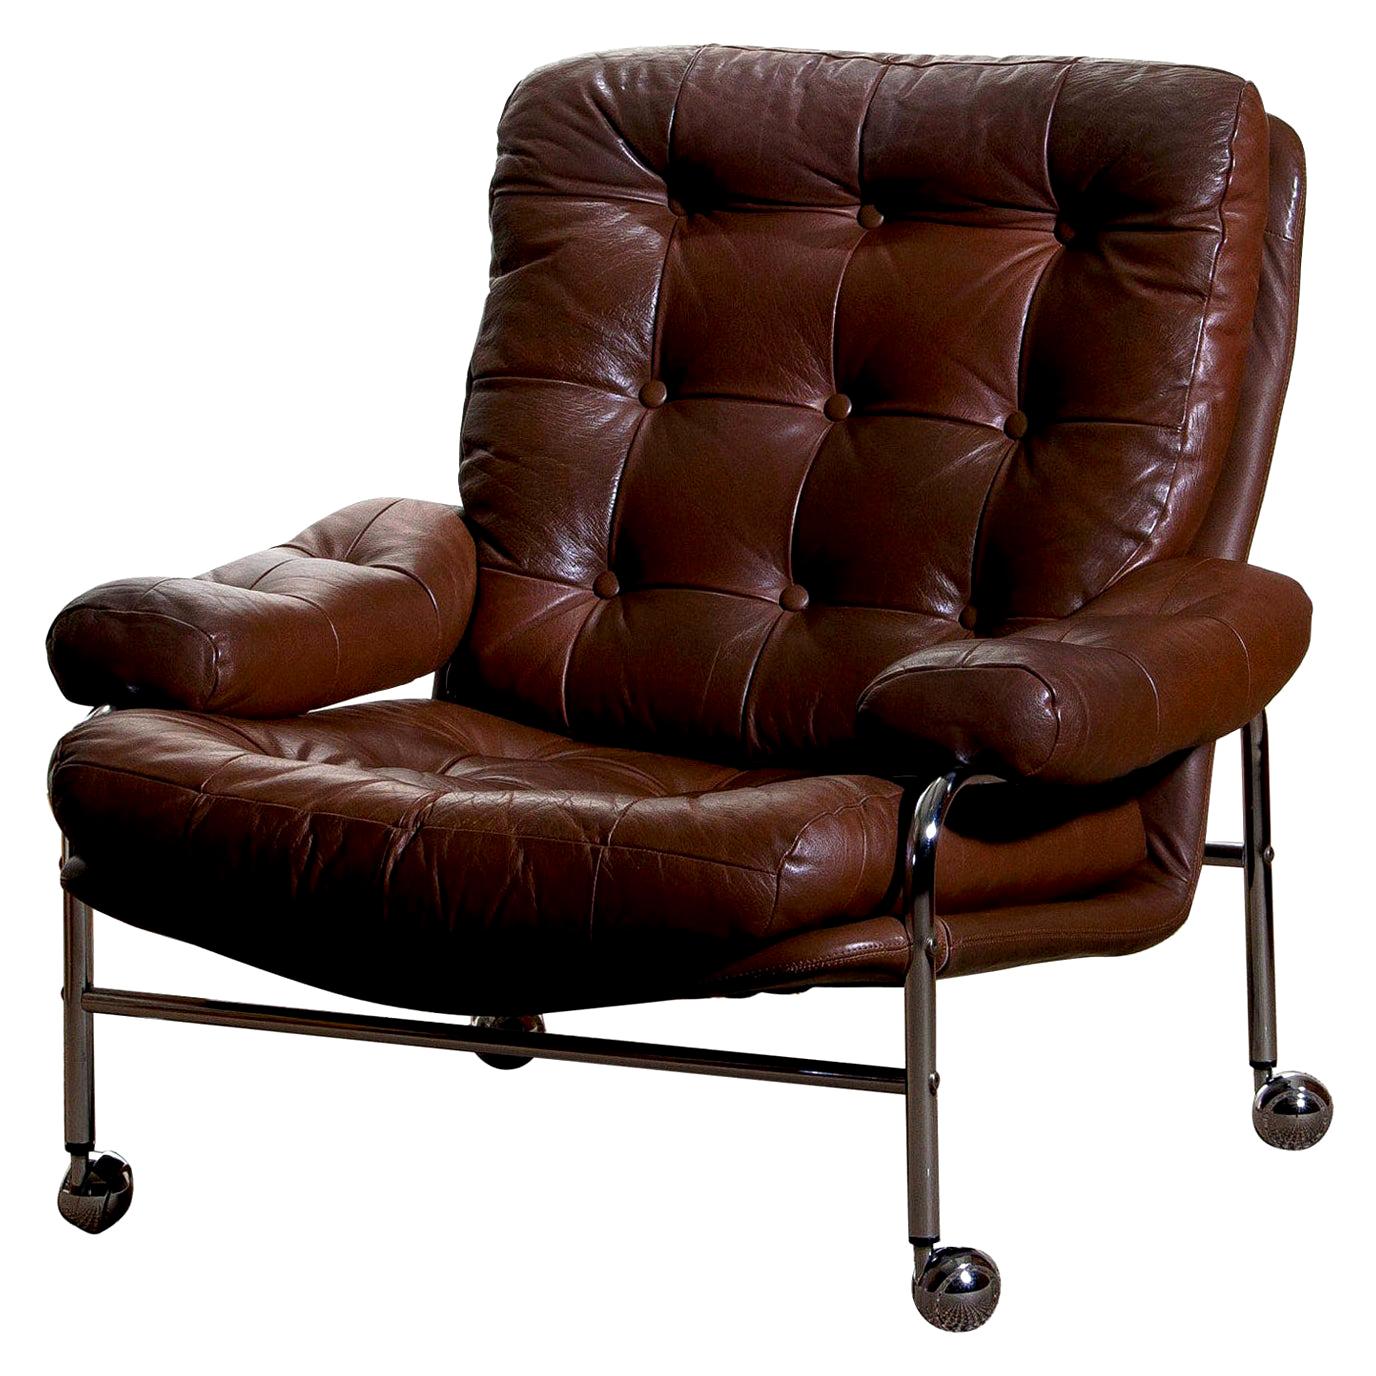 Extremely comfortable easy or lounge chair made by Scapa Rydaholm, Sweden.
This, typical Scandinavian chair is upholstered with brown leather based on a chromed metal frame.
All in perfect condition.
Note: We have two chairs on stock!
  